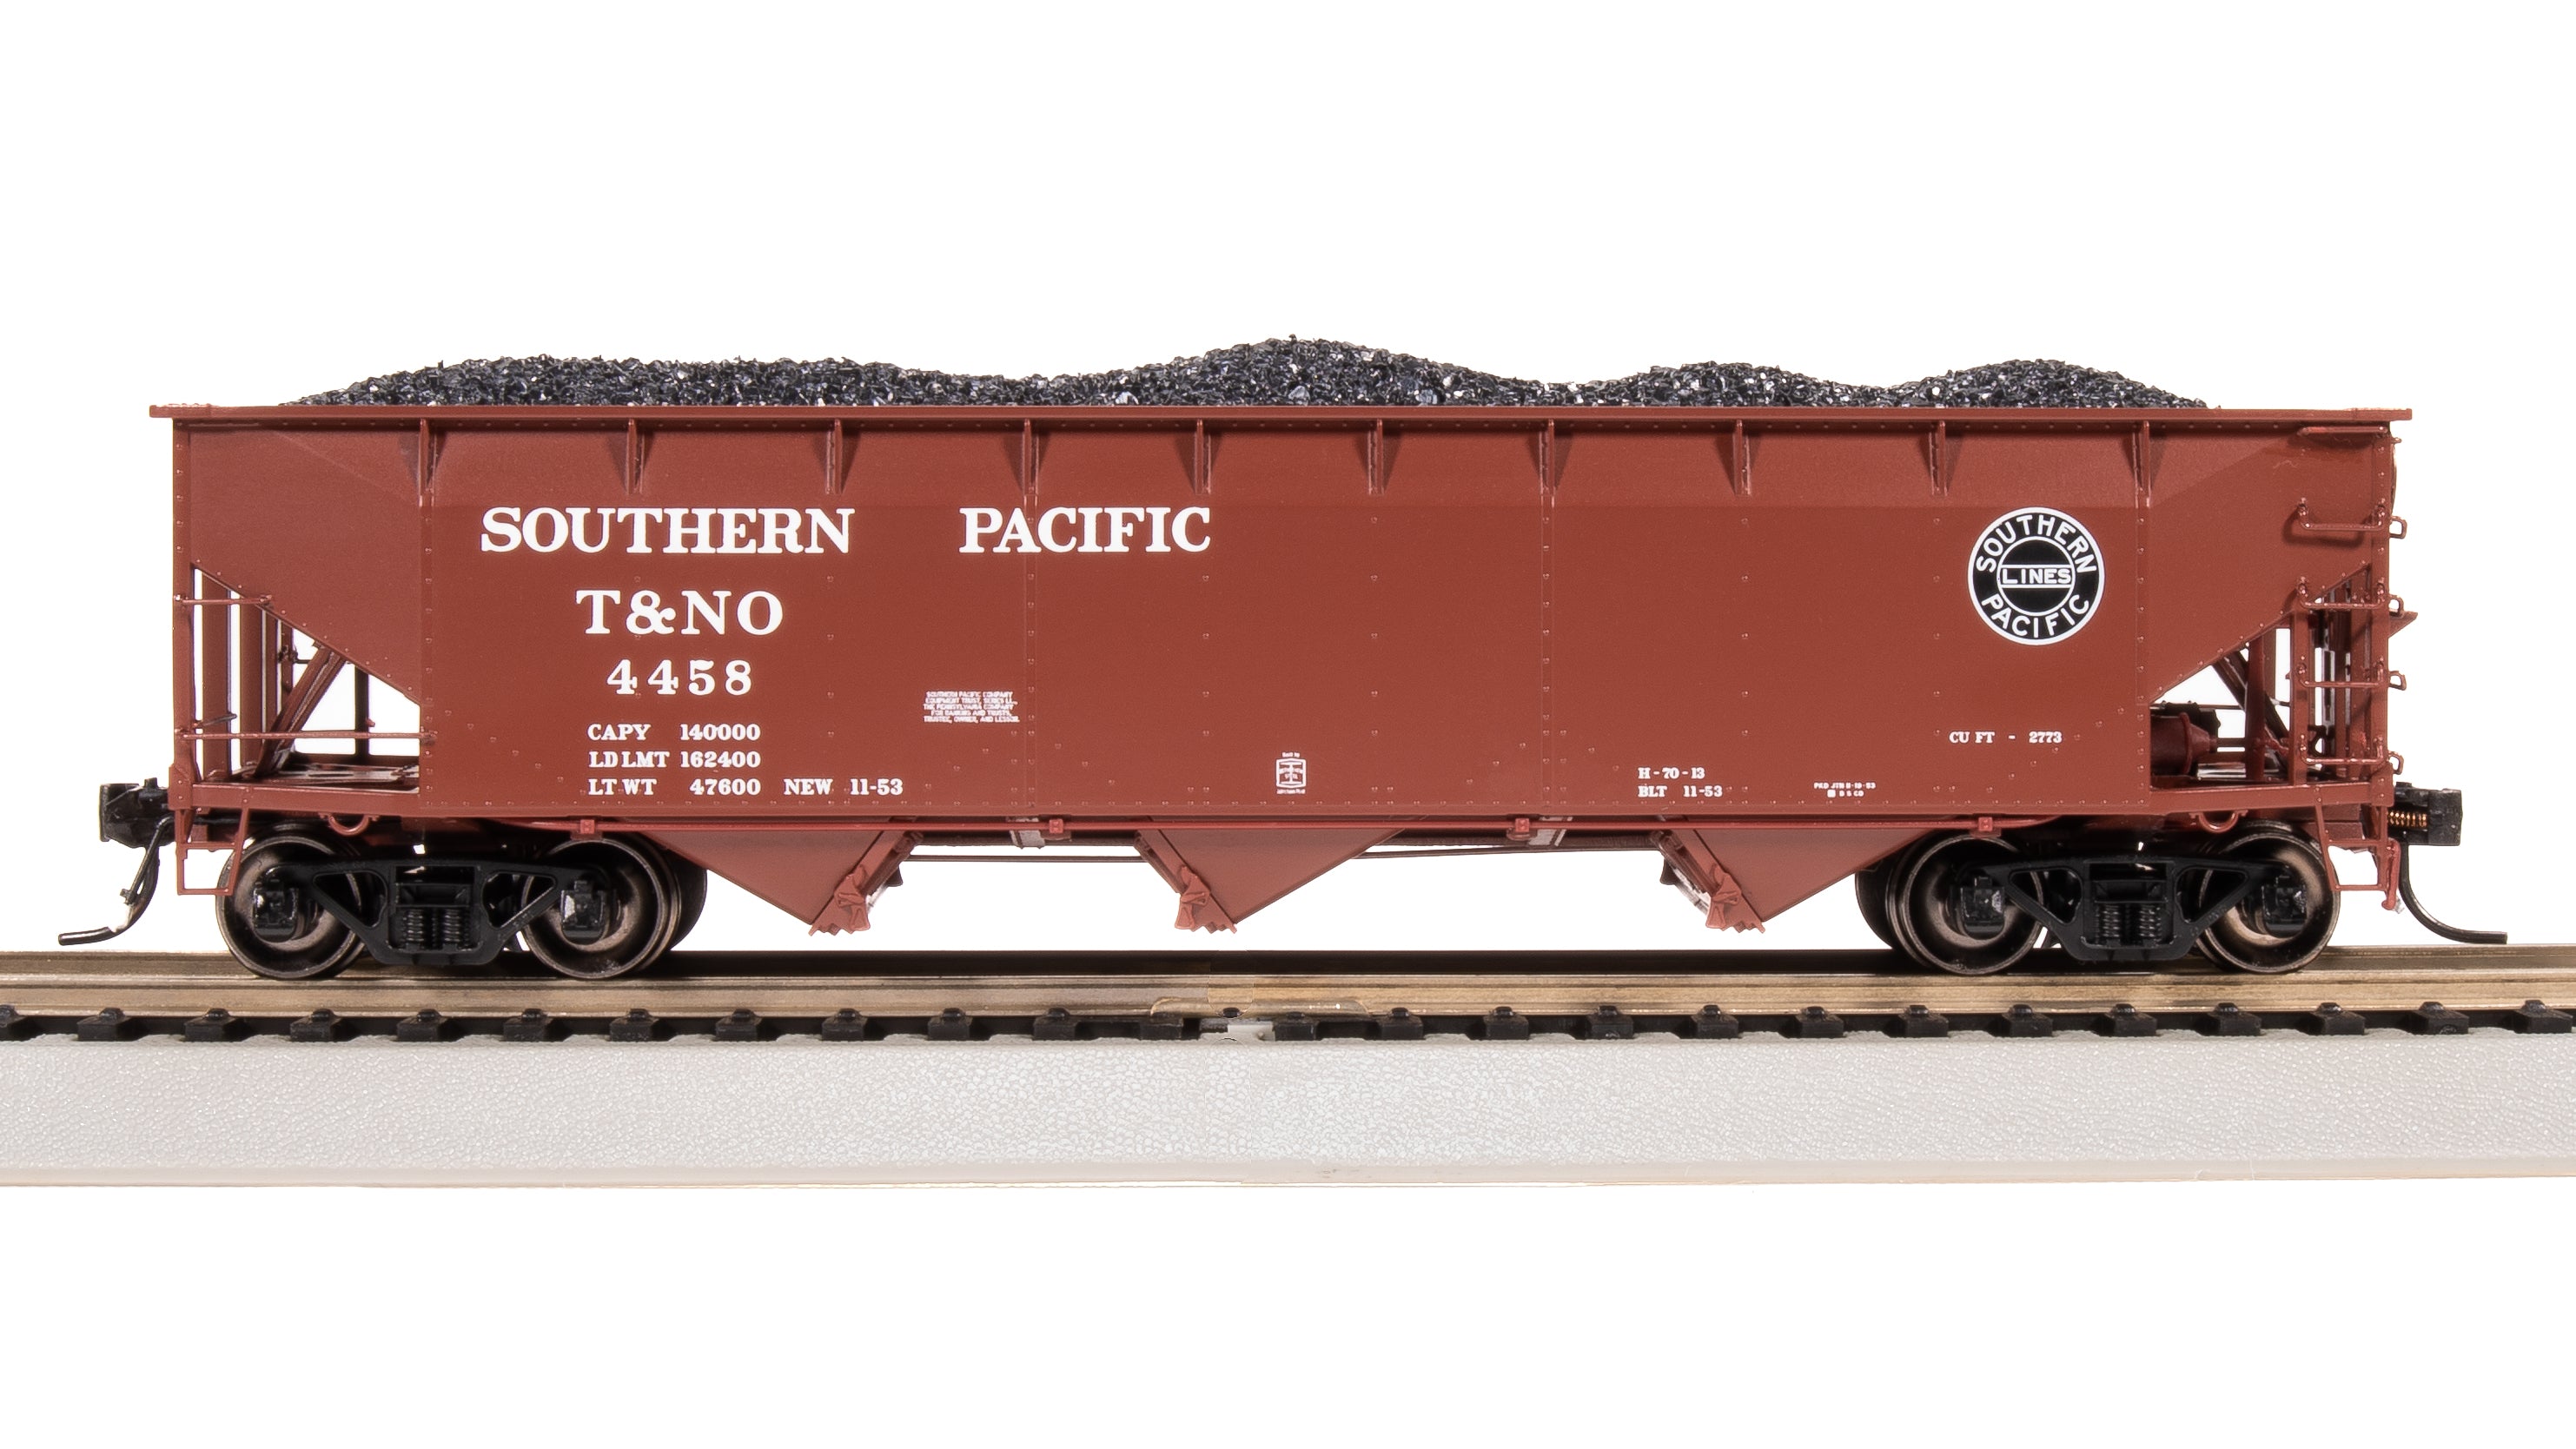 Southern Pacific *PRE-ORDER*, Board Game